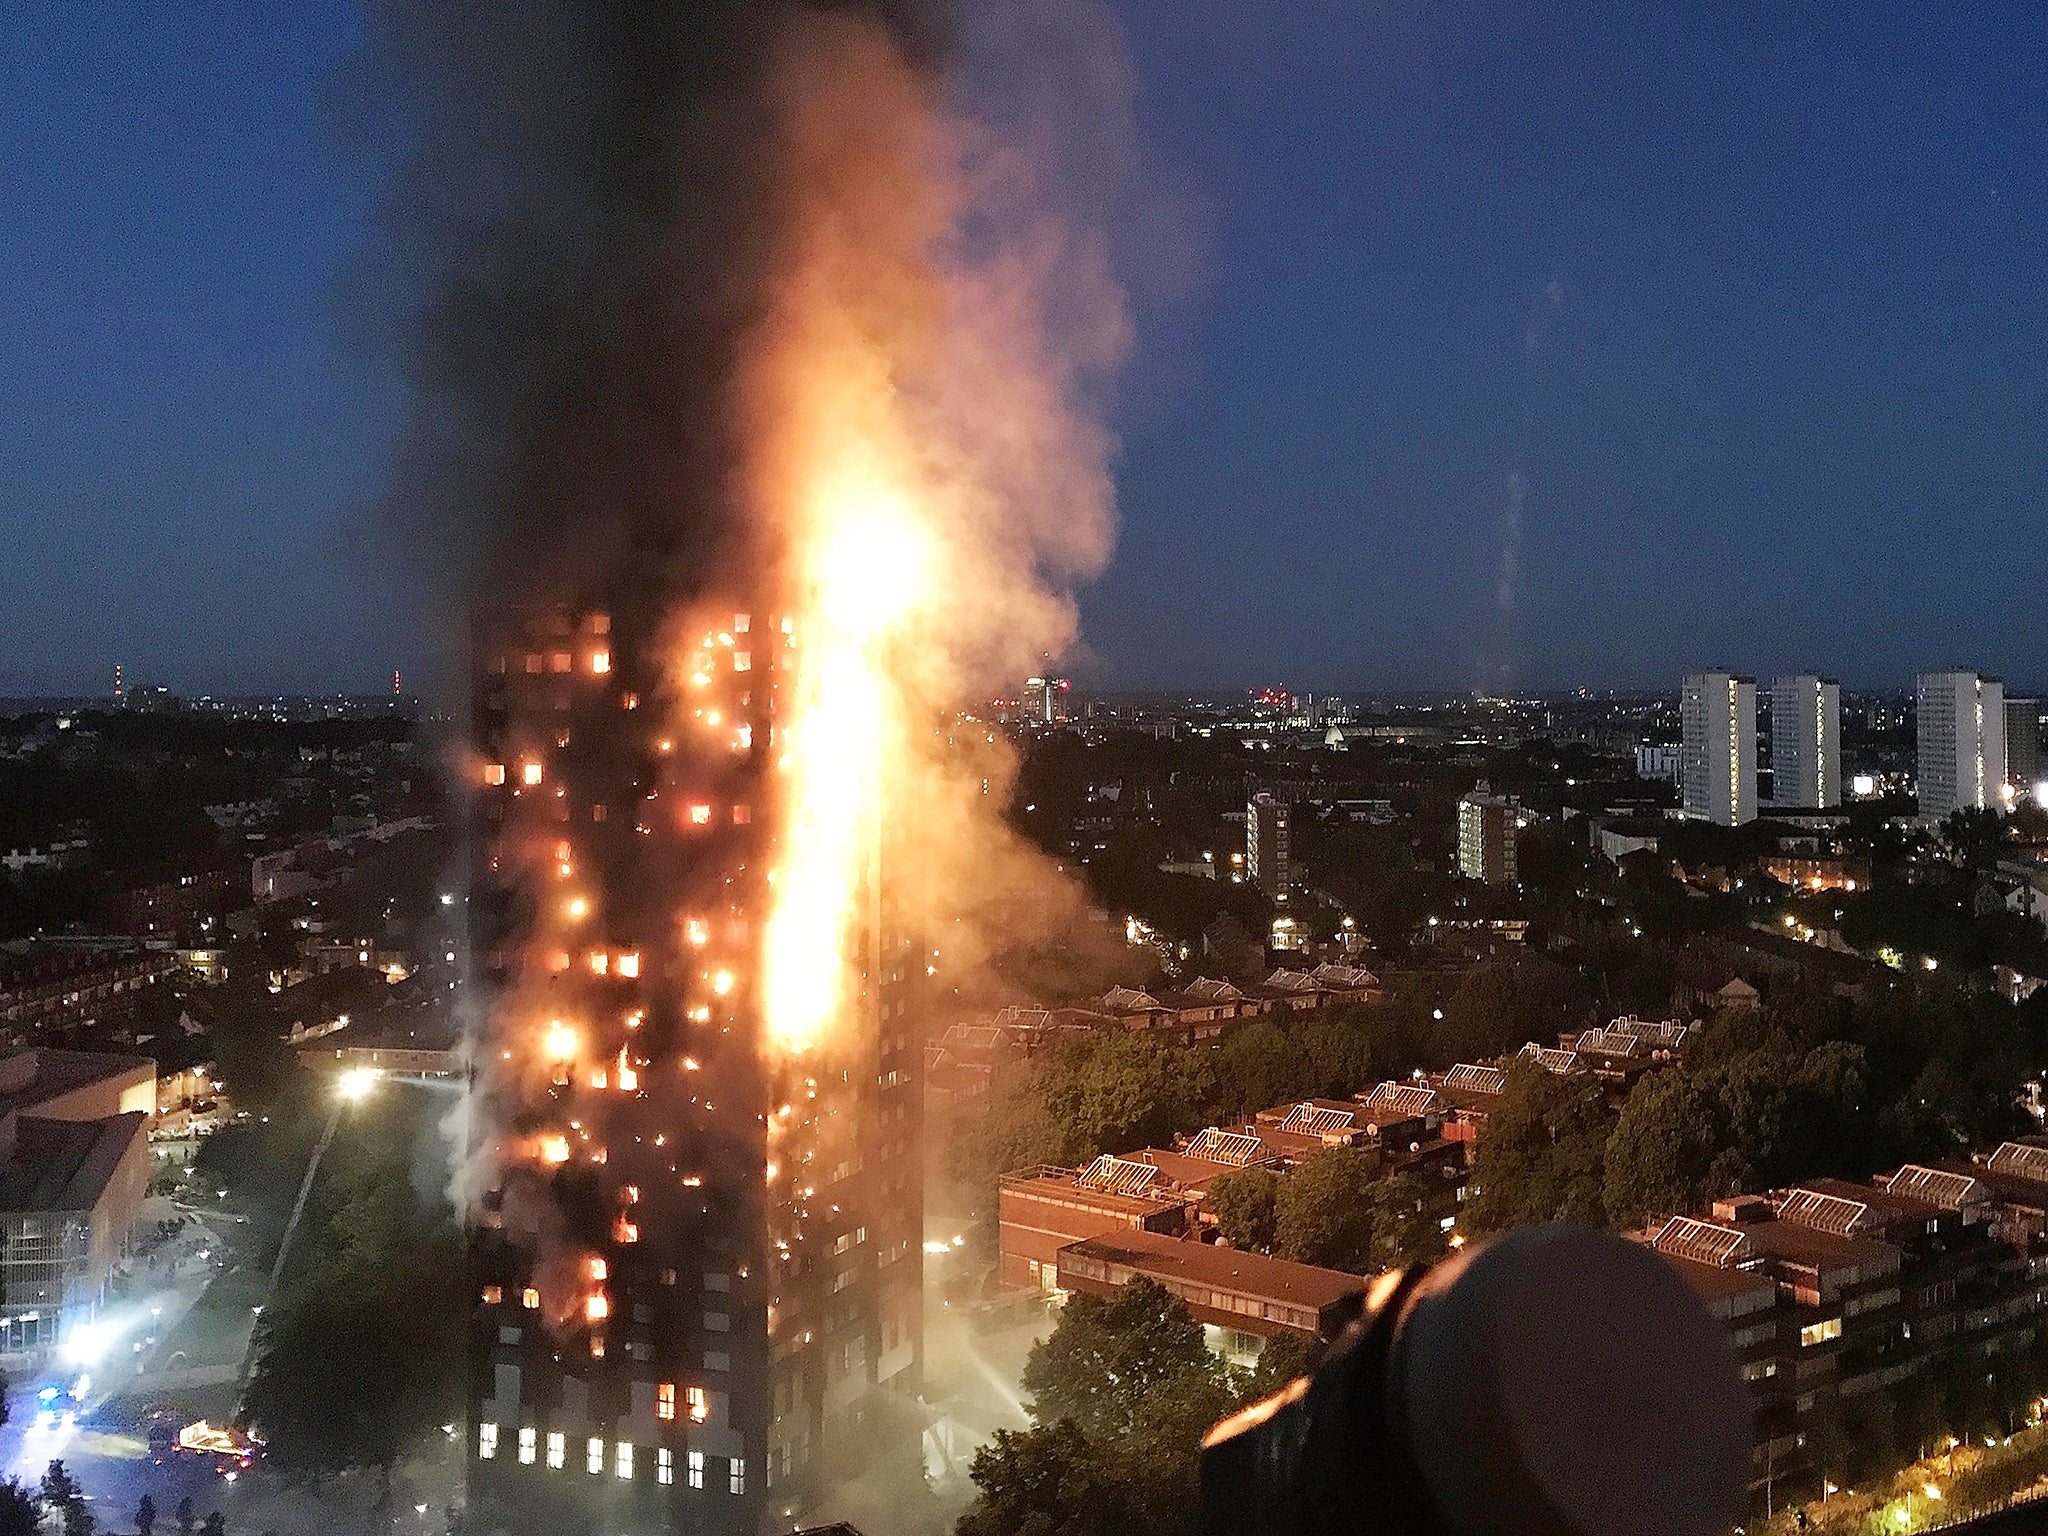 The Grenfell fire in June 2017 killed 72 people